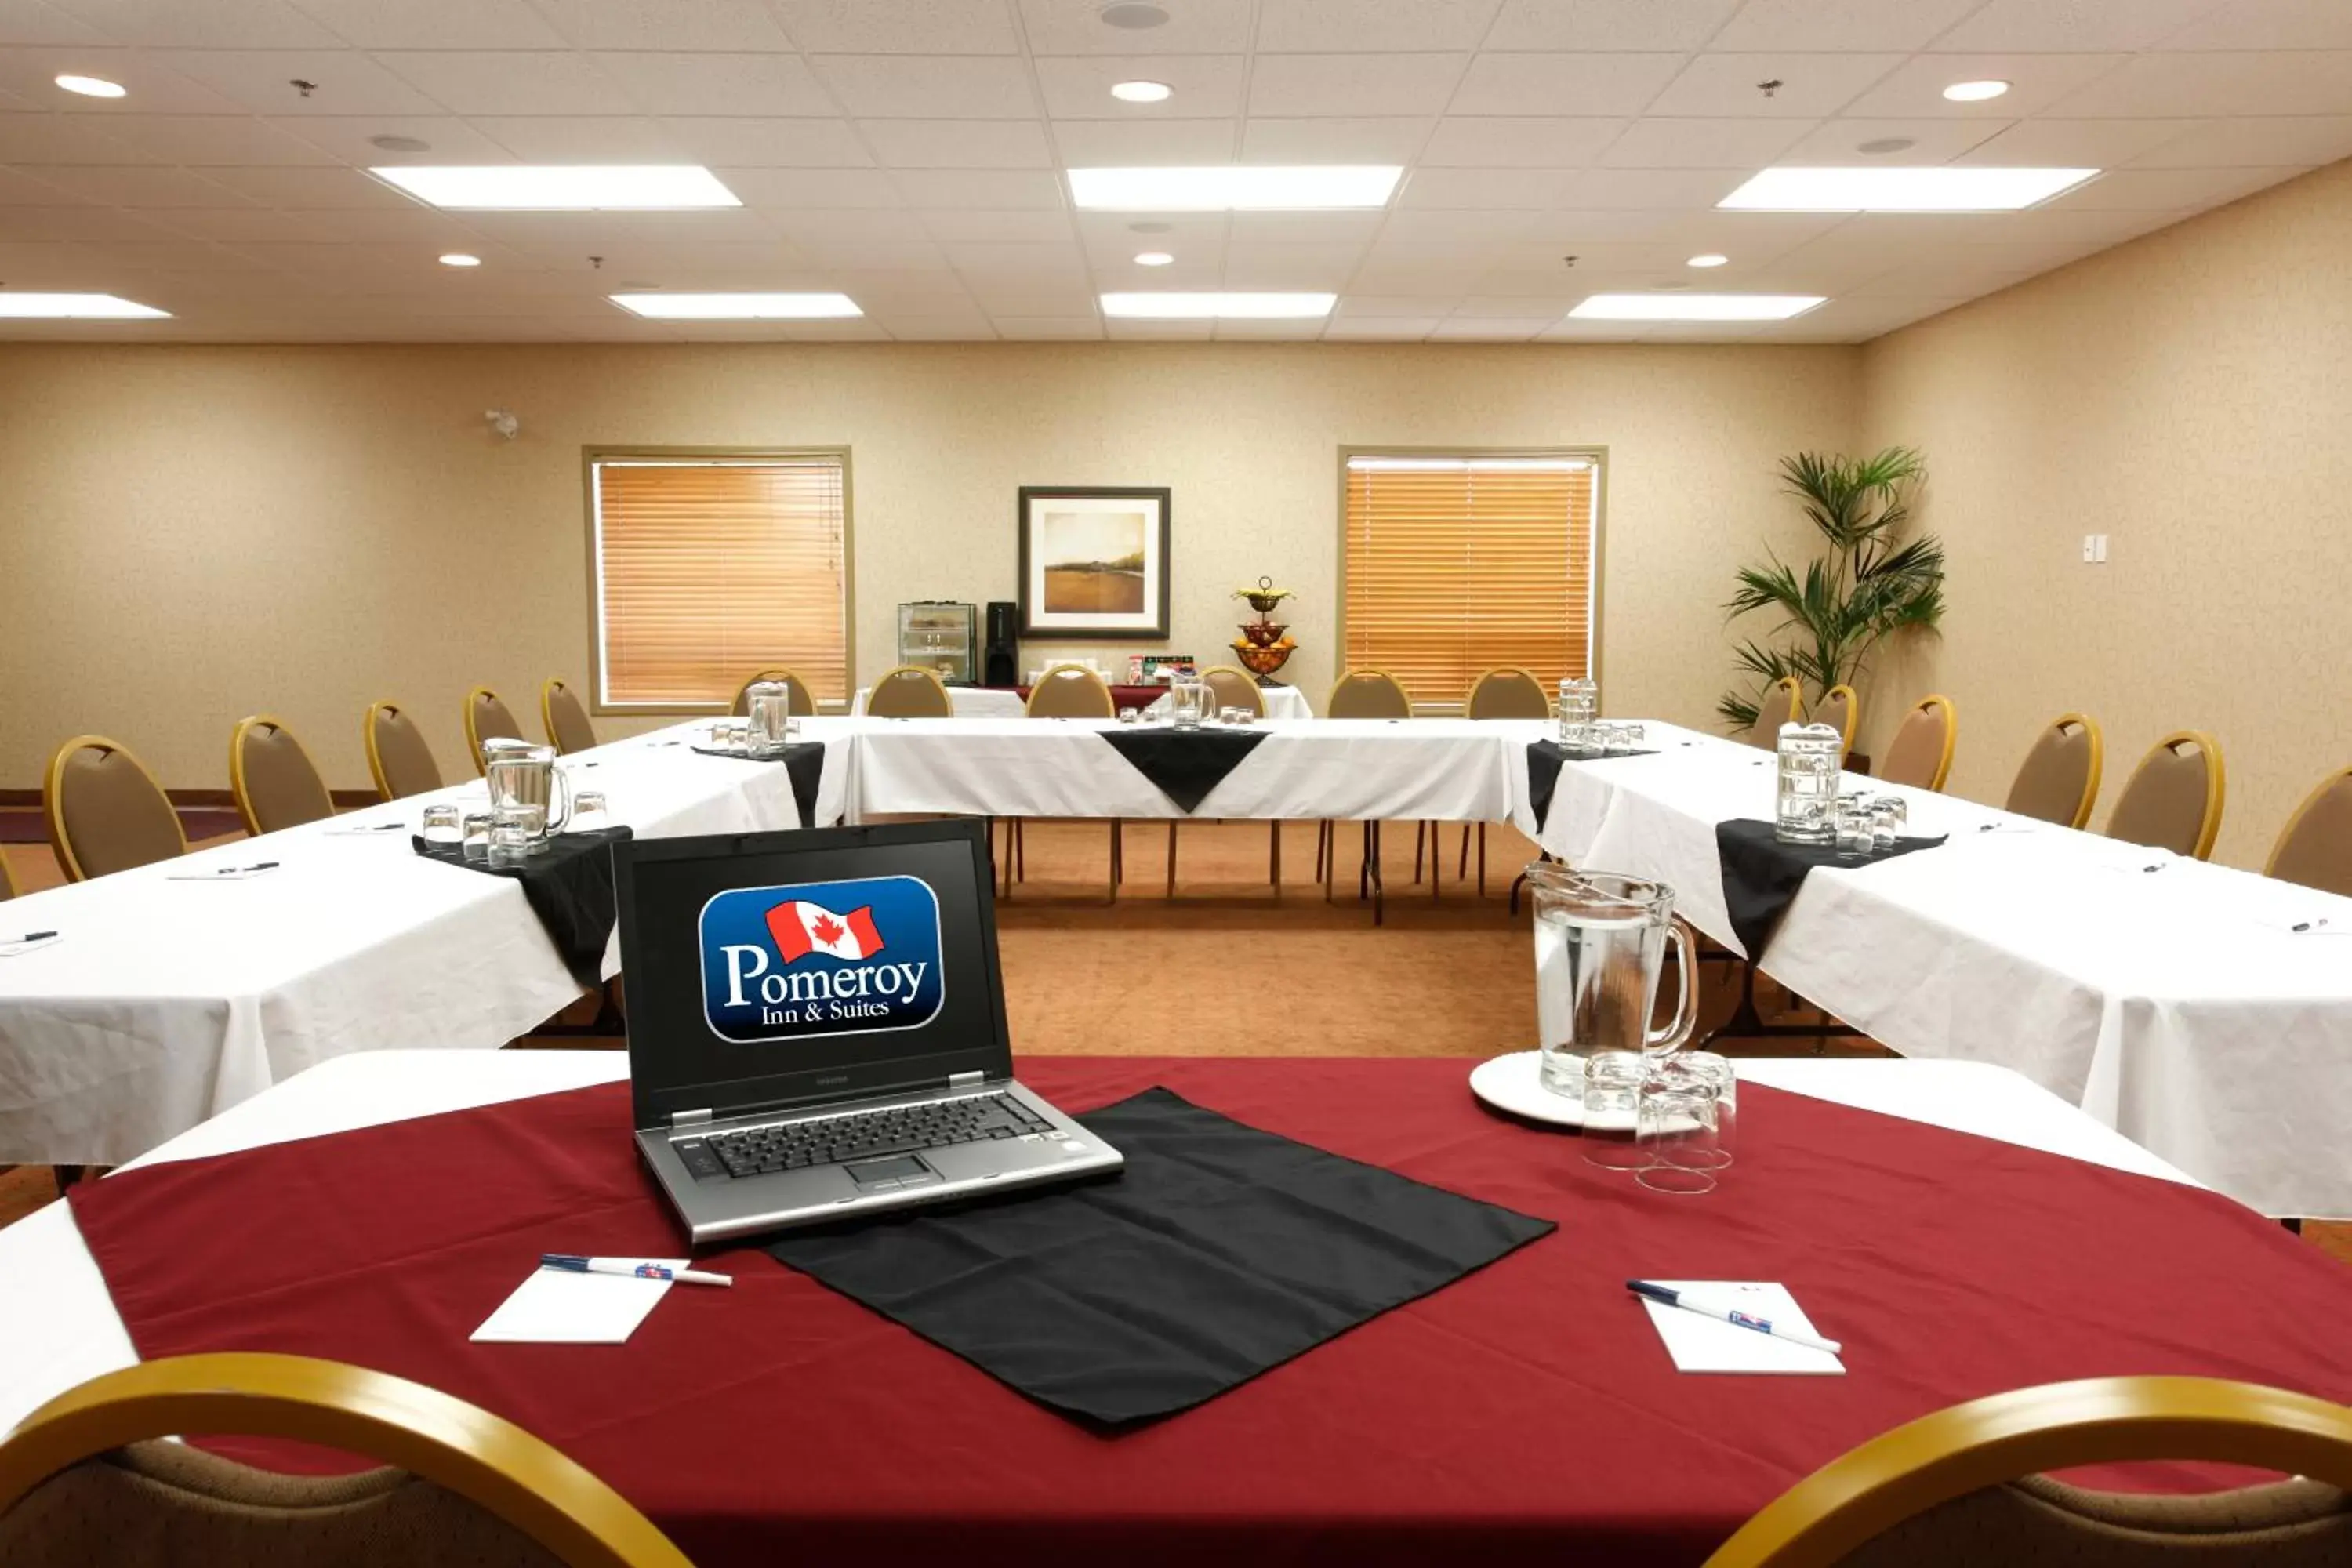 Meeting/conference room in Pomeroy Inn and Suites Chetwynd